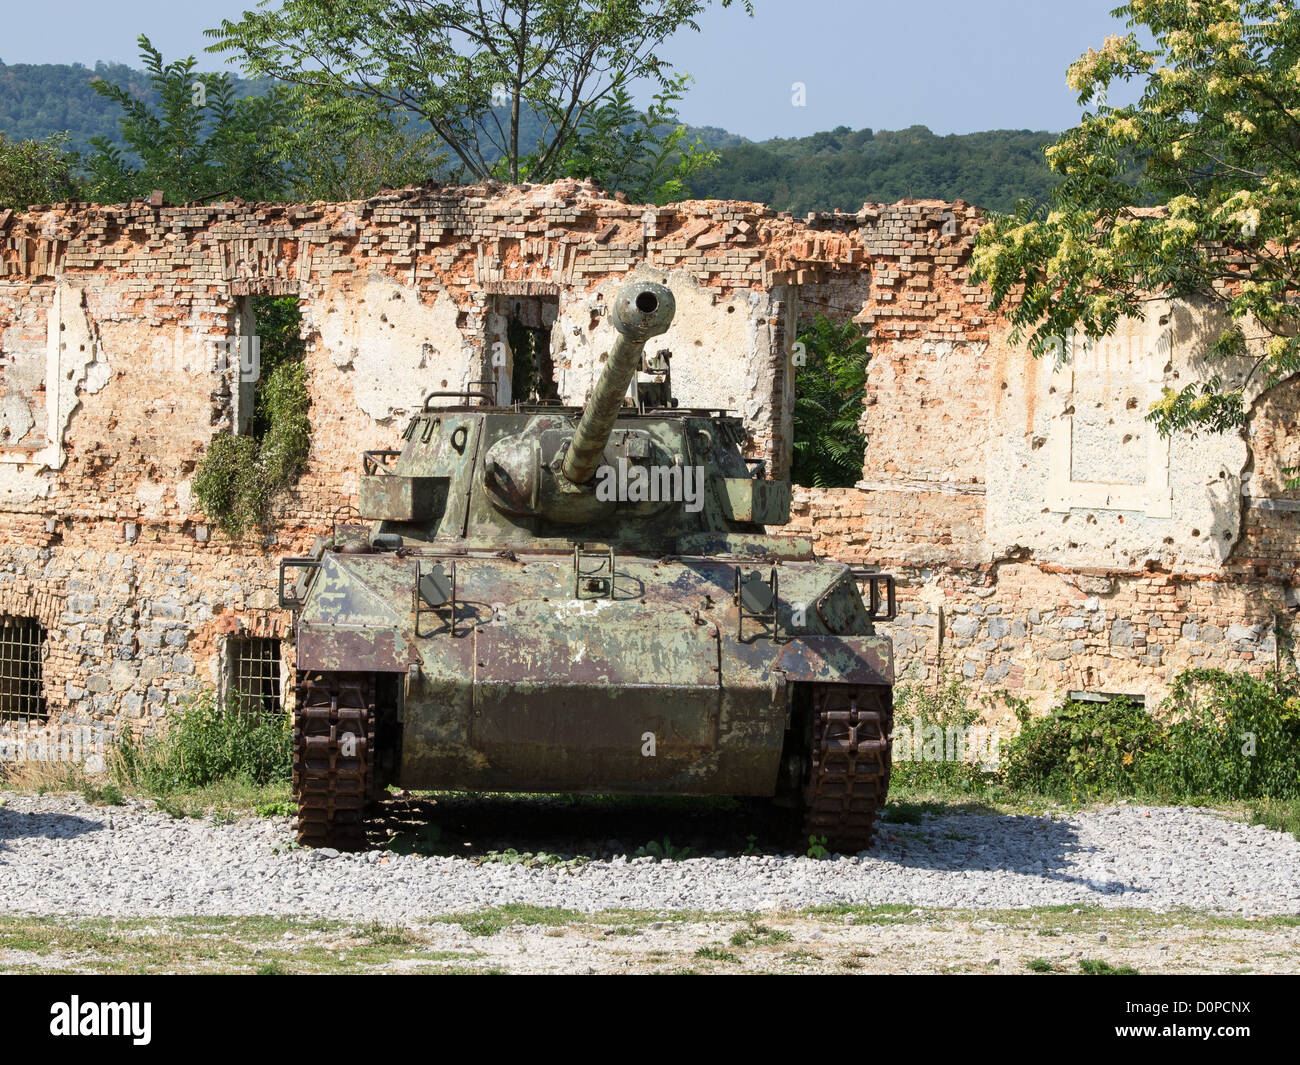 old army tank infront of burned house Stock Photo